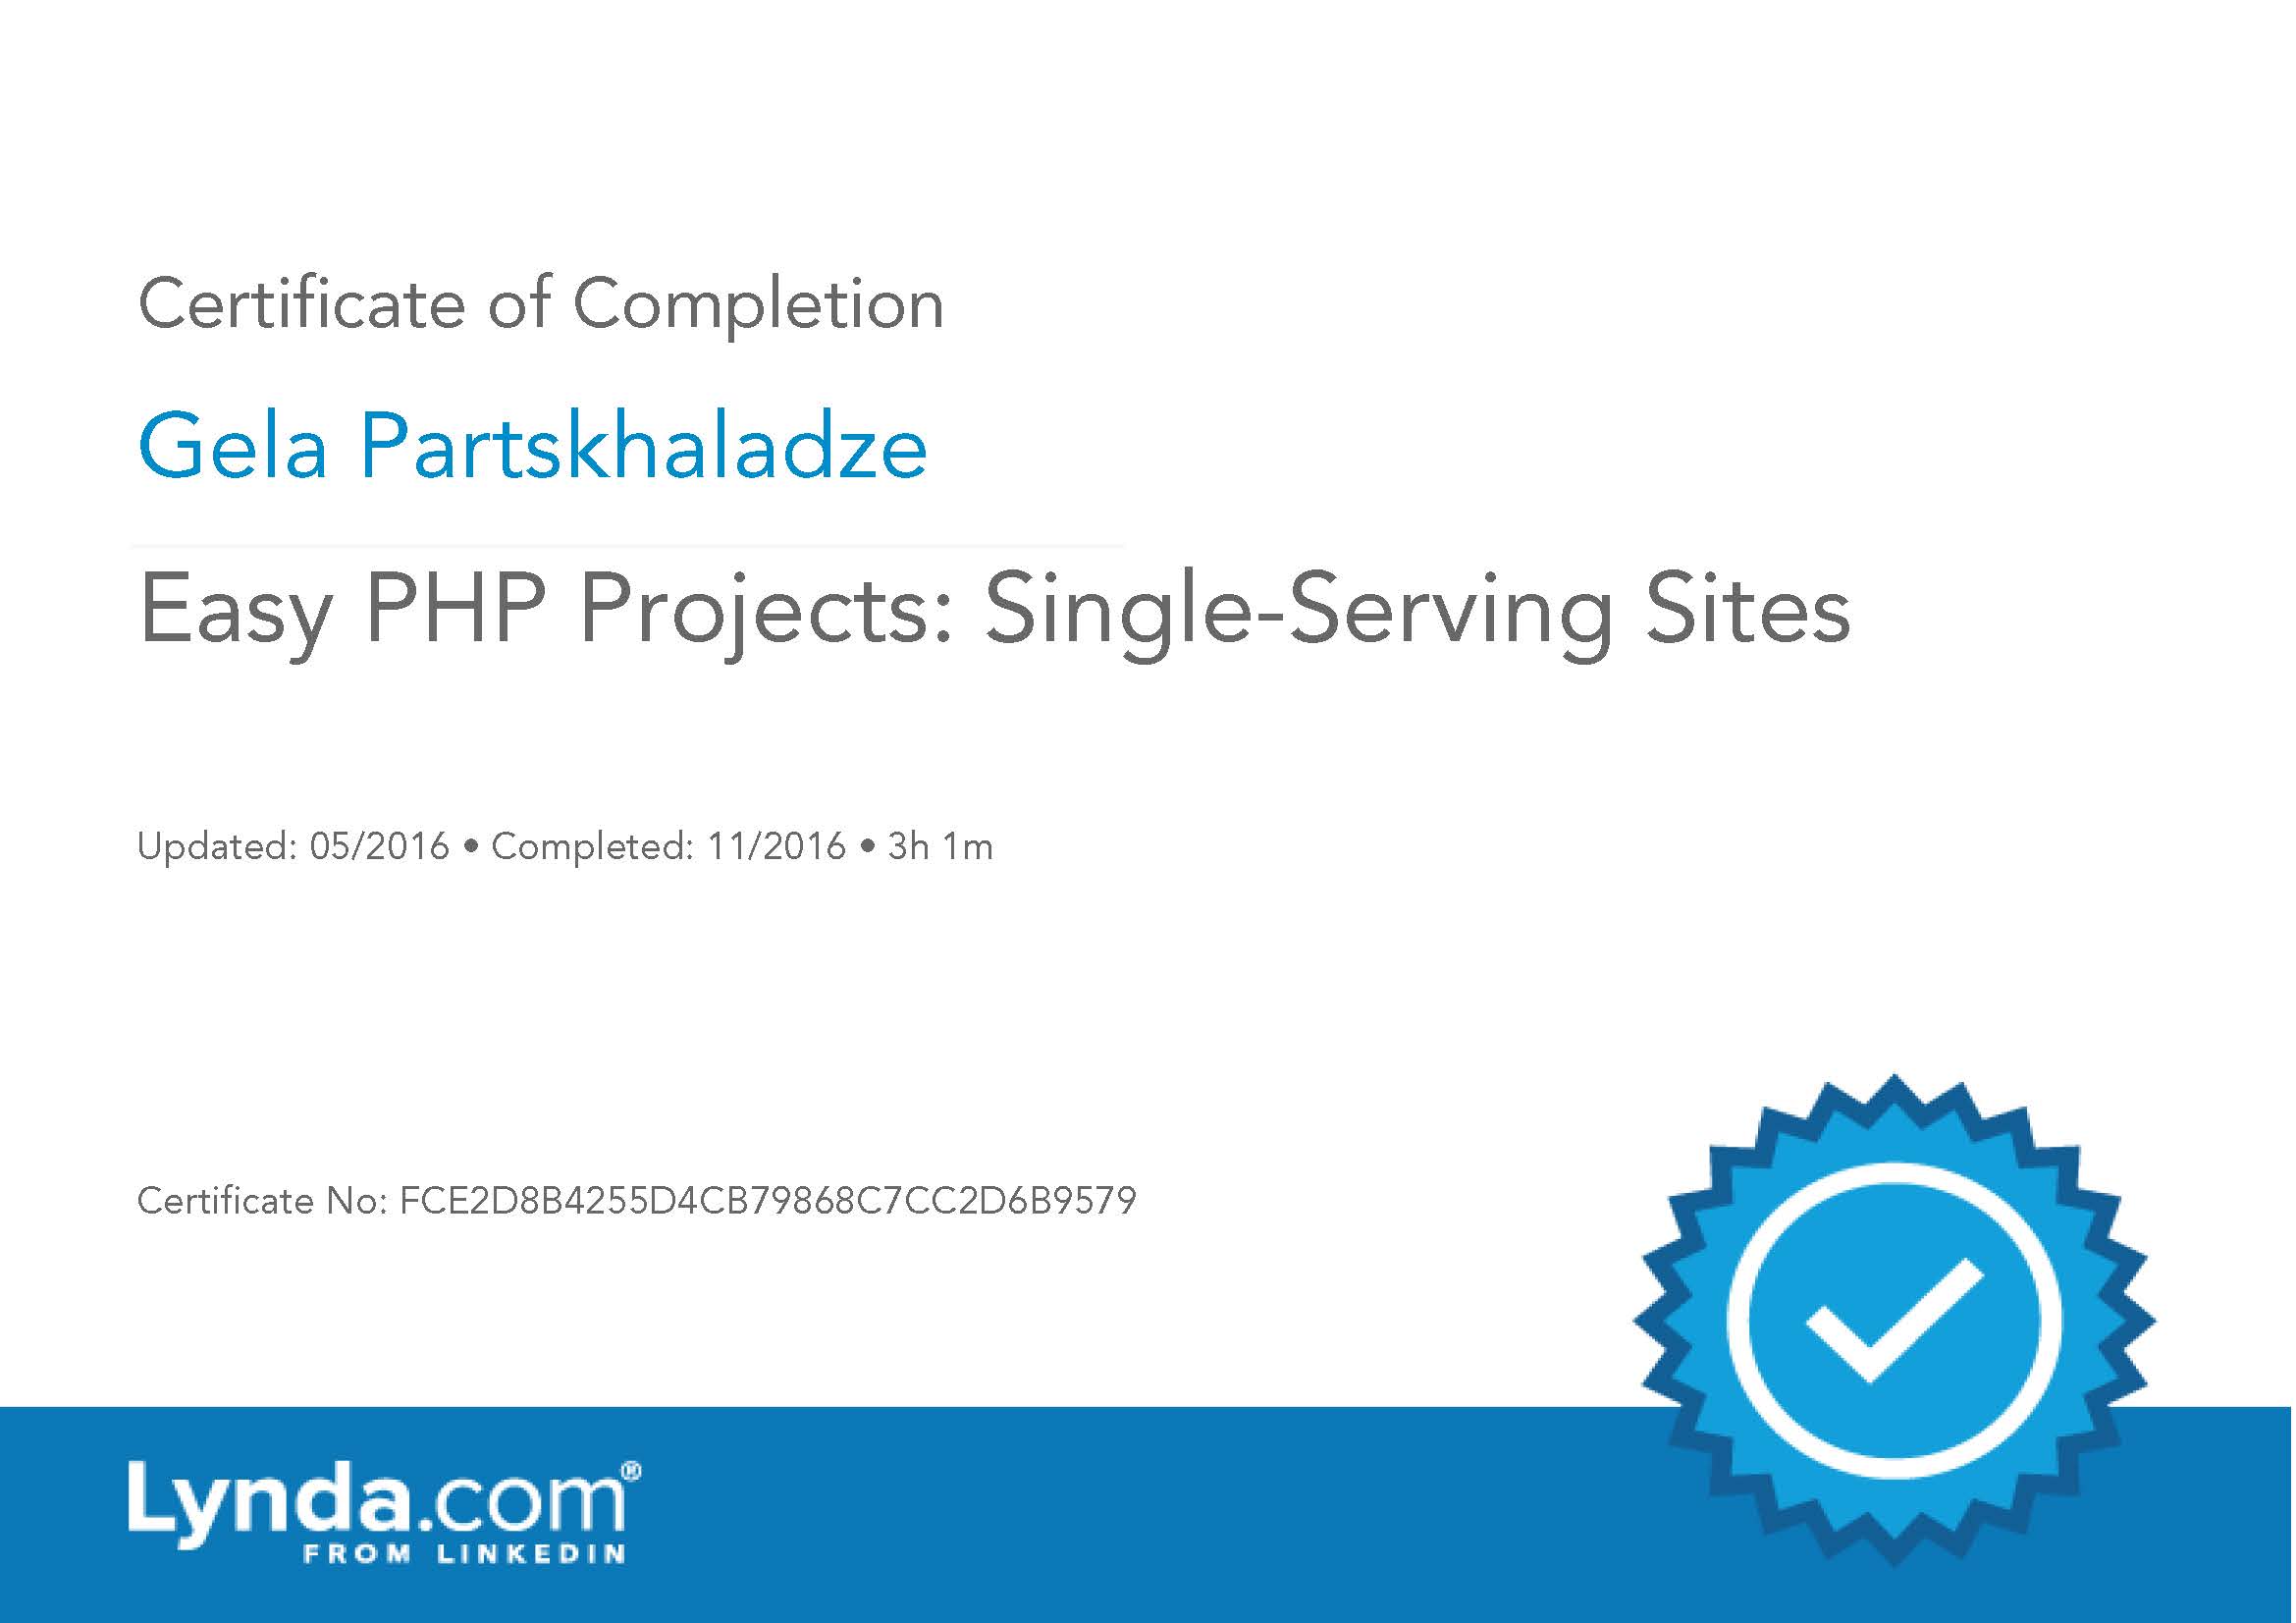 Easy PHP Projects: Single-Serving Sites